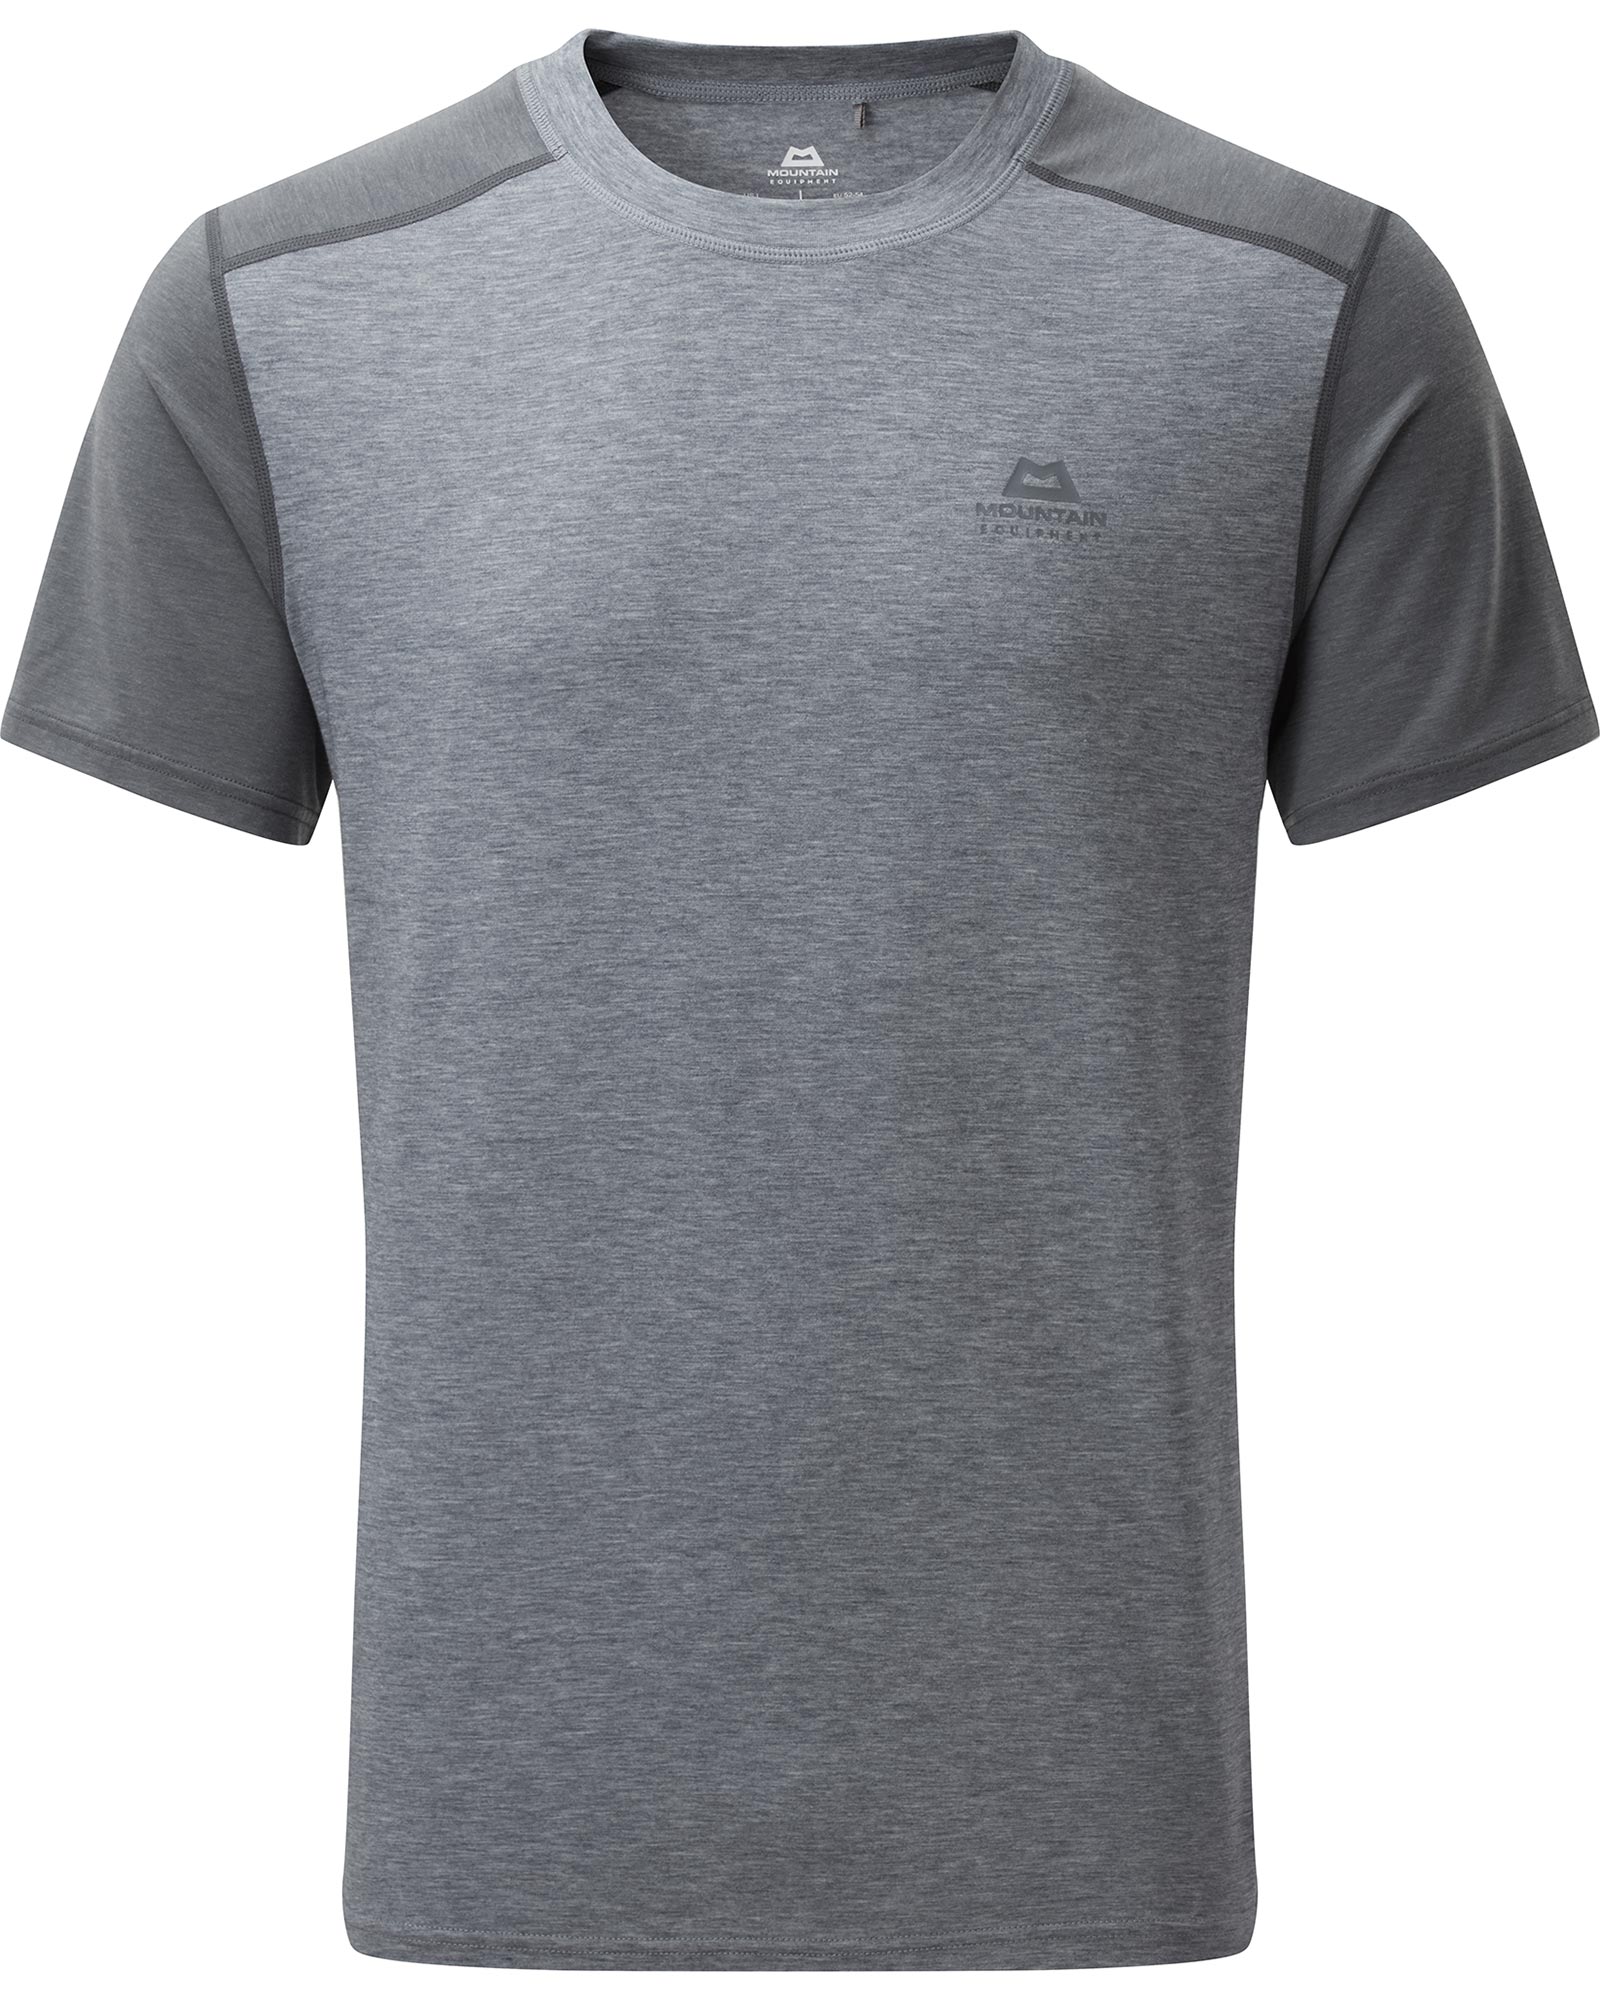 Product image of Mountain equipment Headpoint Block Men's T-Shirt